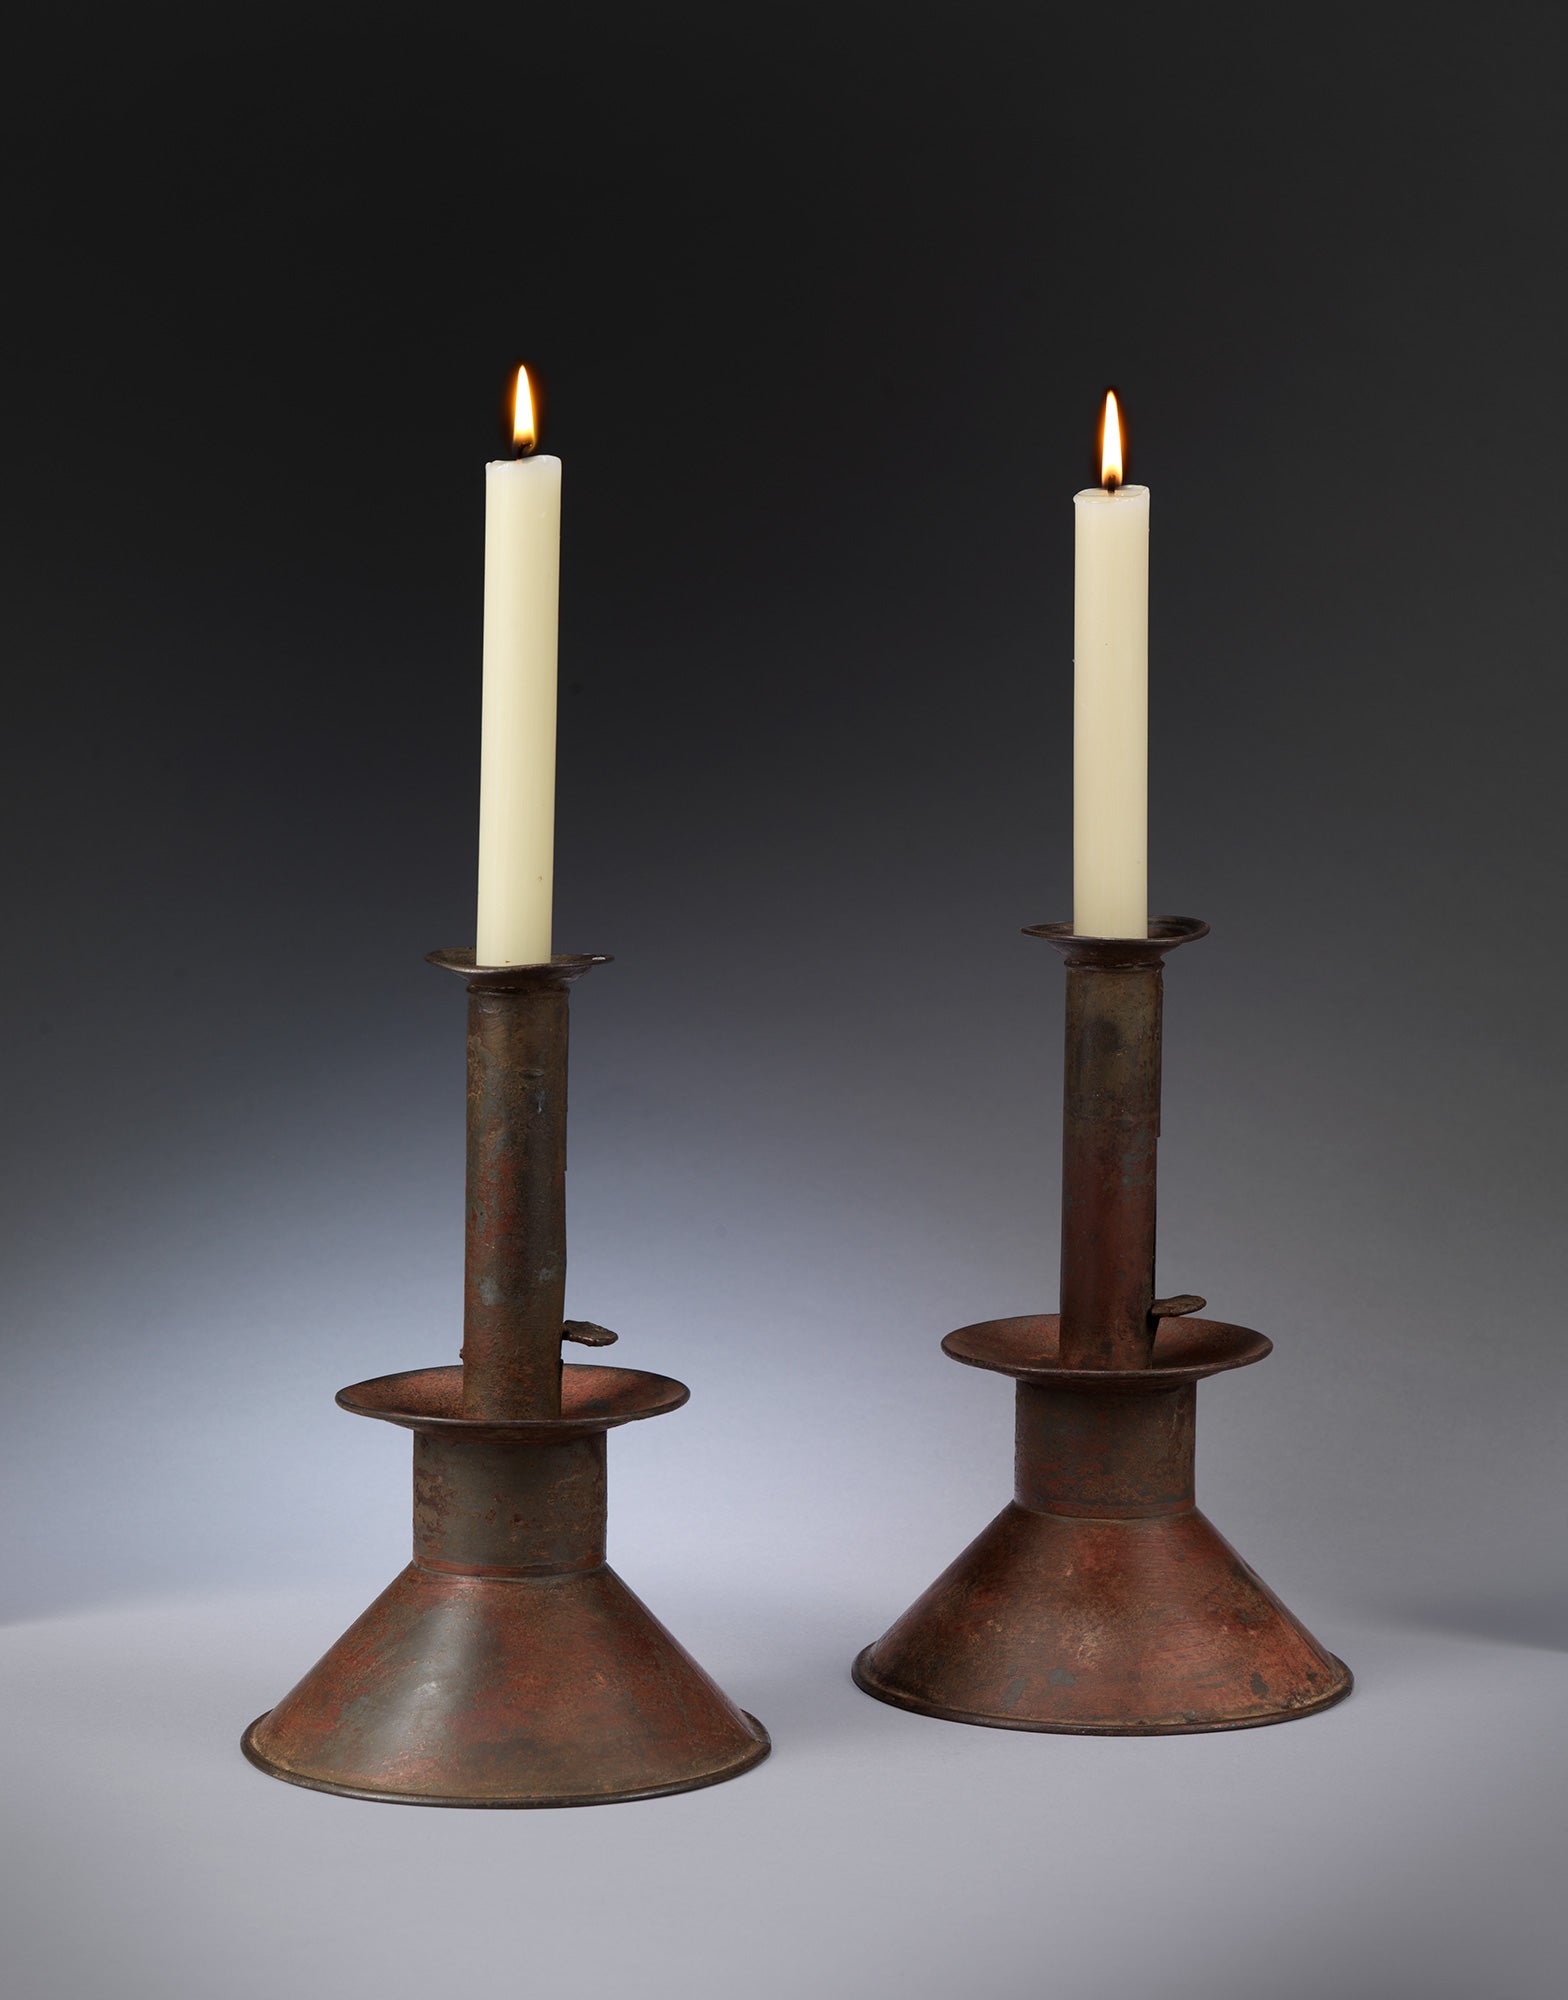 Rare Pair of Graphic Georgian Conical Based Ejector Candlesticks